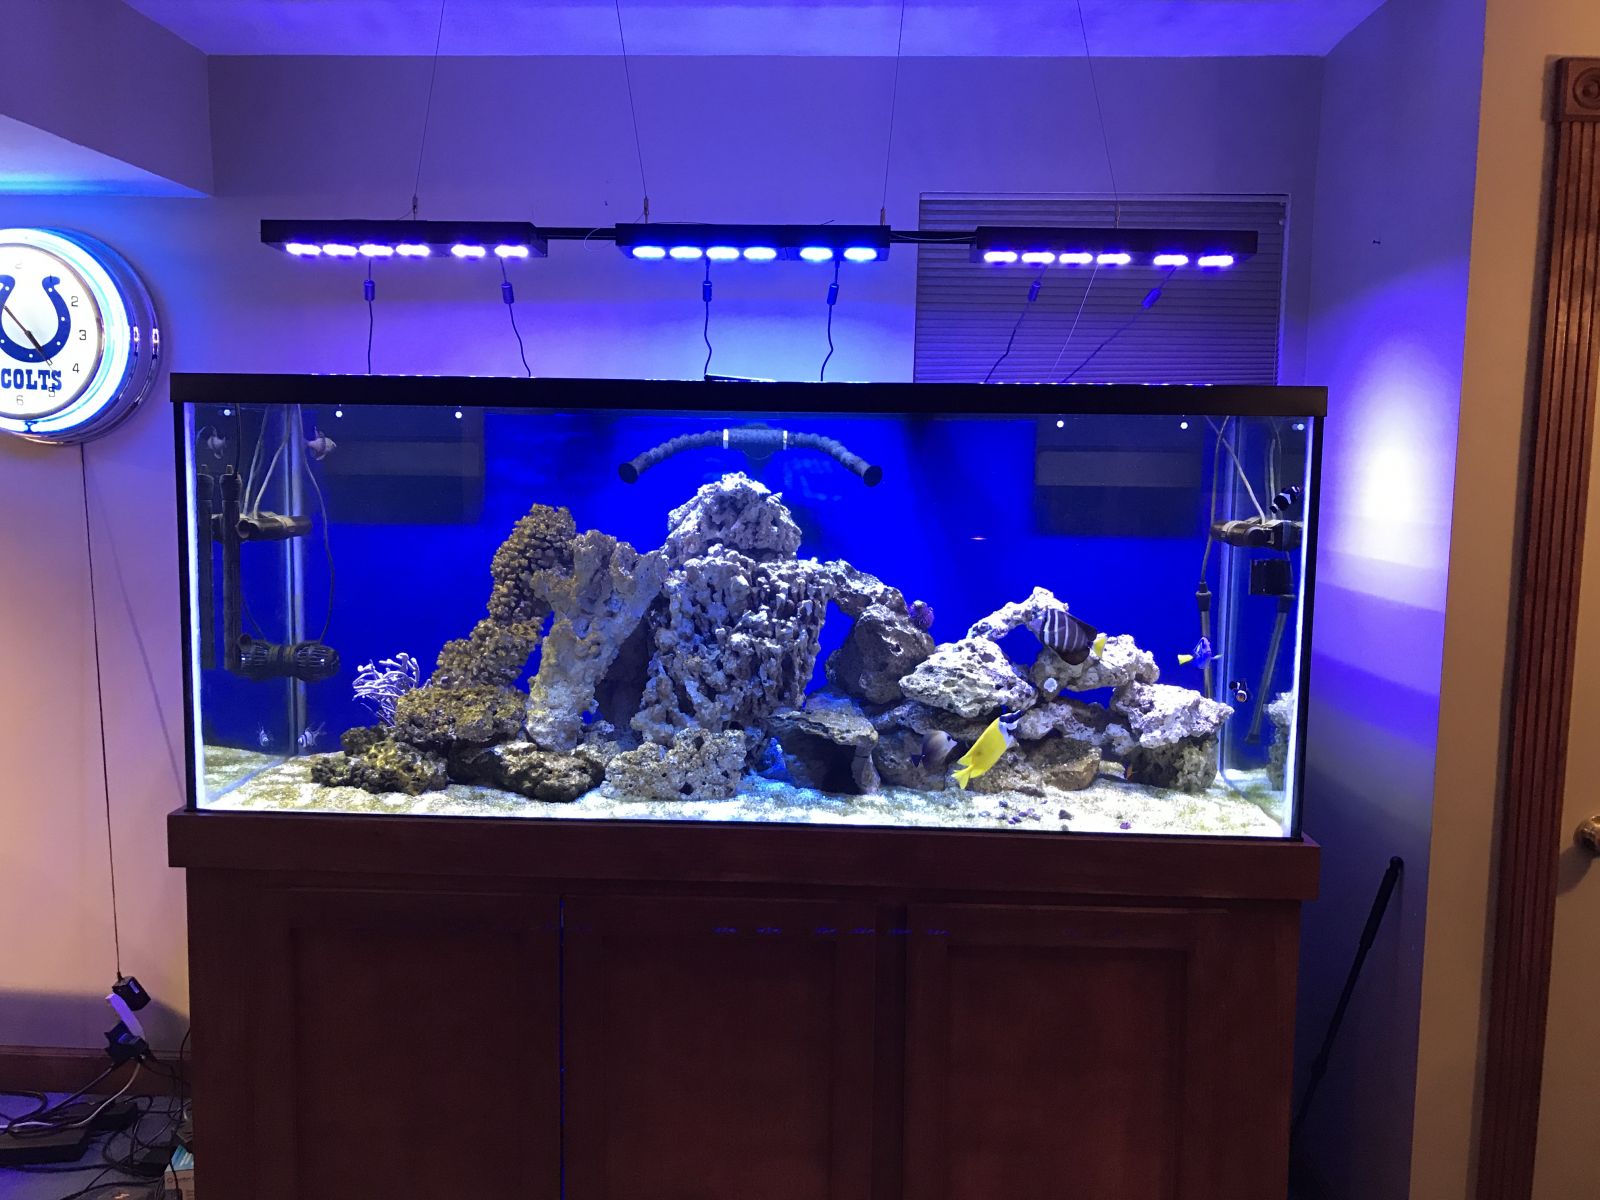 Fish and a few test corals added